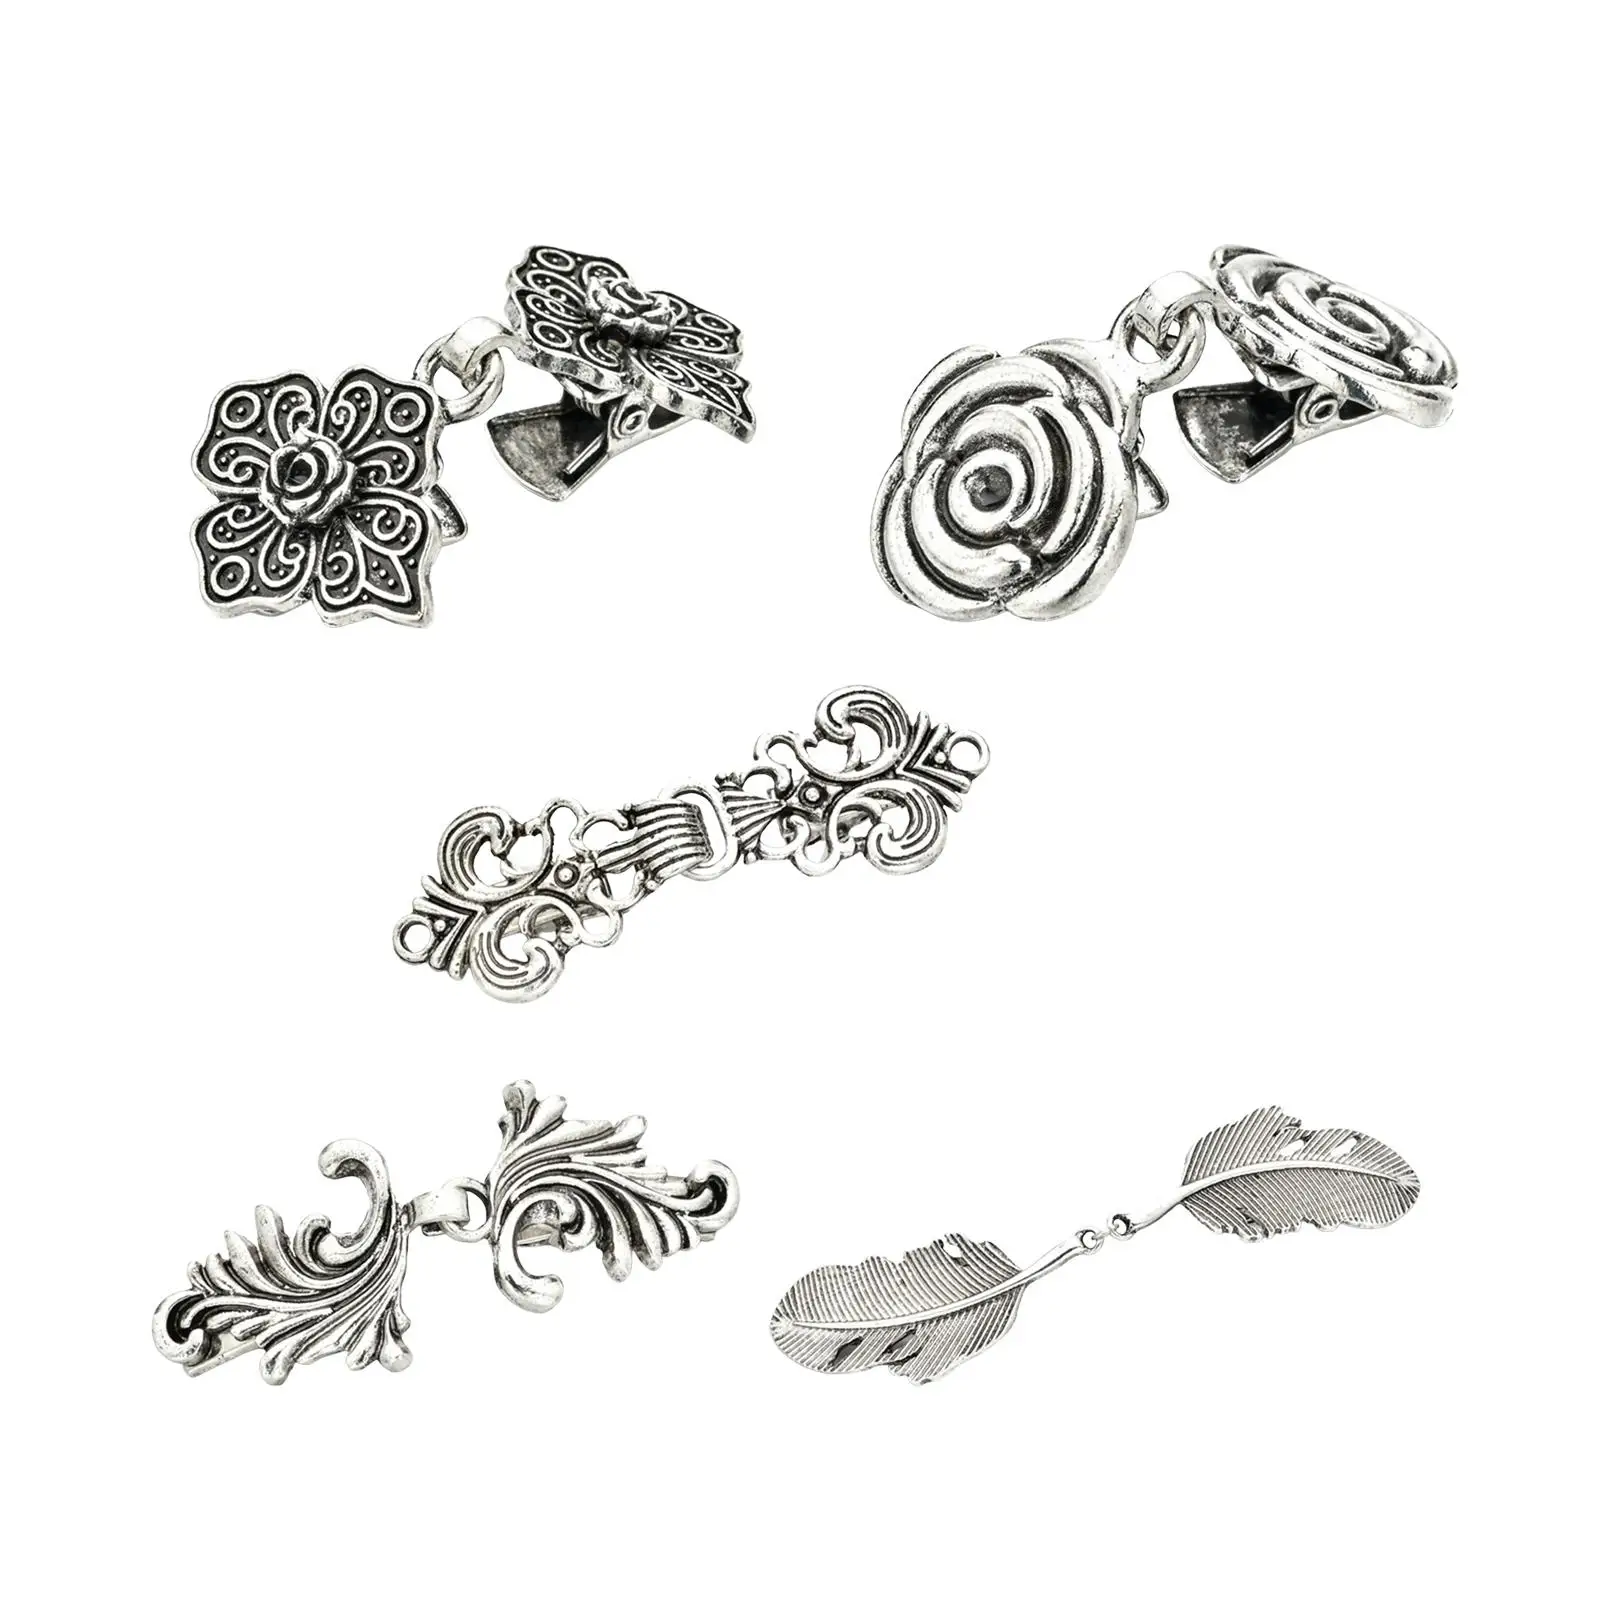 5 Pieces Sweater Brooch Clip Decor Shirt Brooch Clips Fashion Alloy Cardigan Clasp for Cloak Clothes Collar Scarf Girls wearing